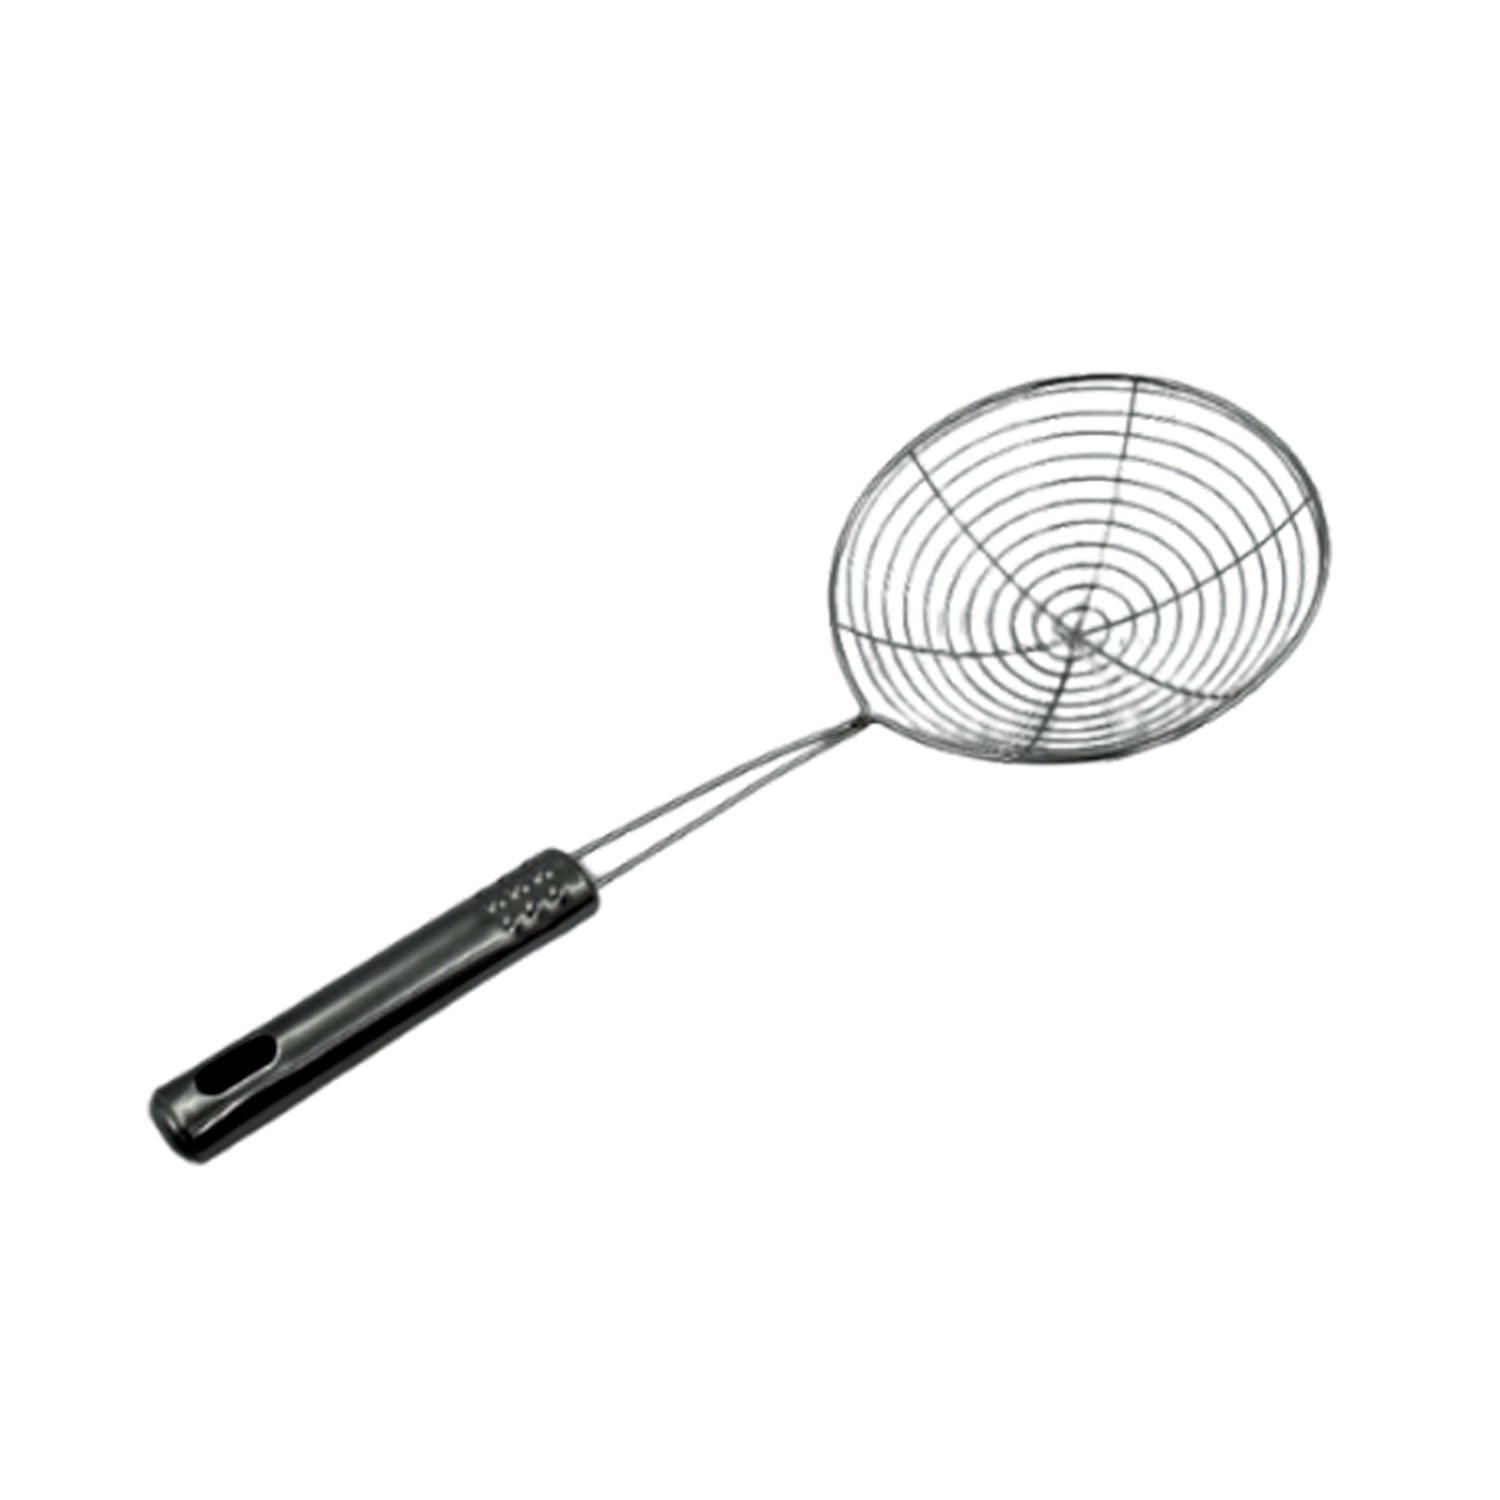 2727 Mini Oil Strainer To Get Perfect Fried Food Stuffs Easily Without Any Problem And Damage.